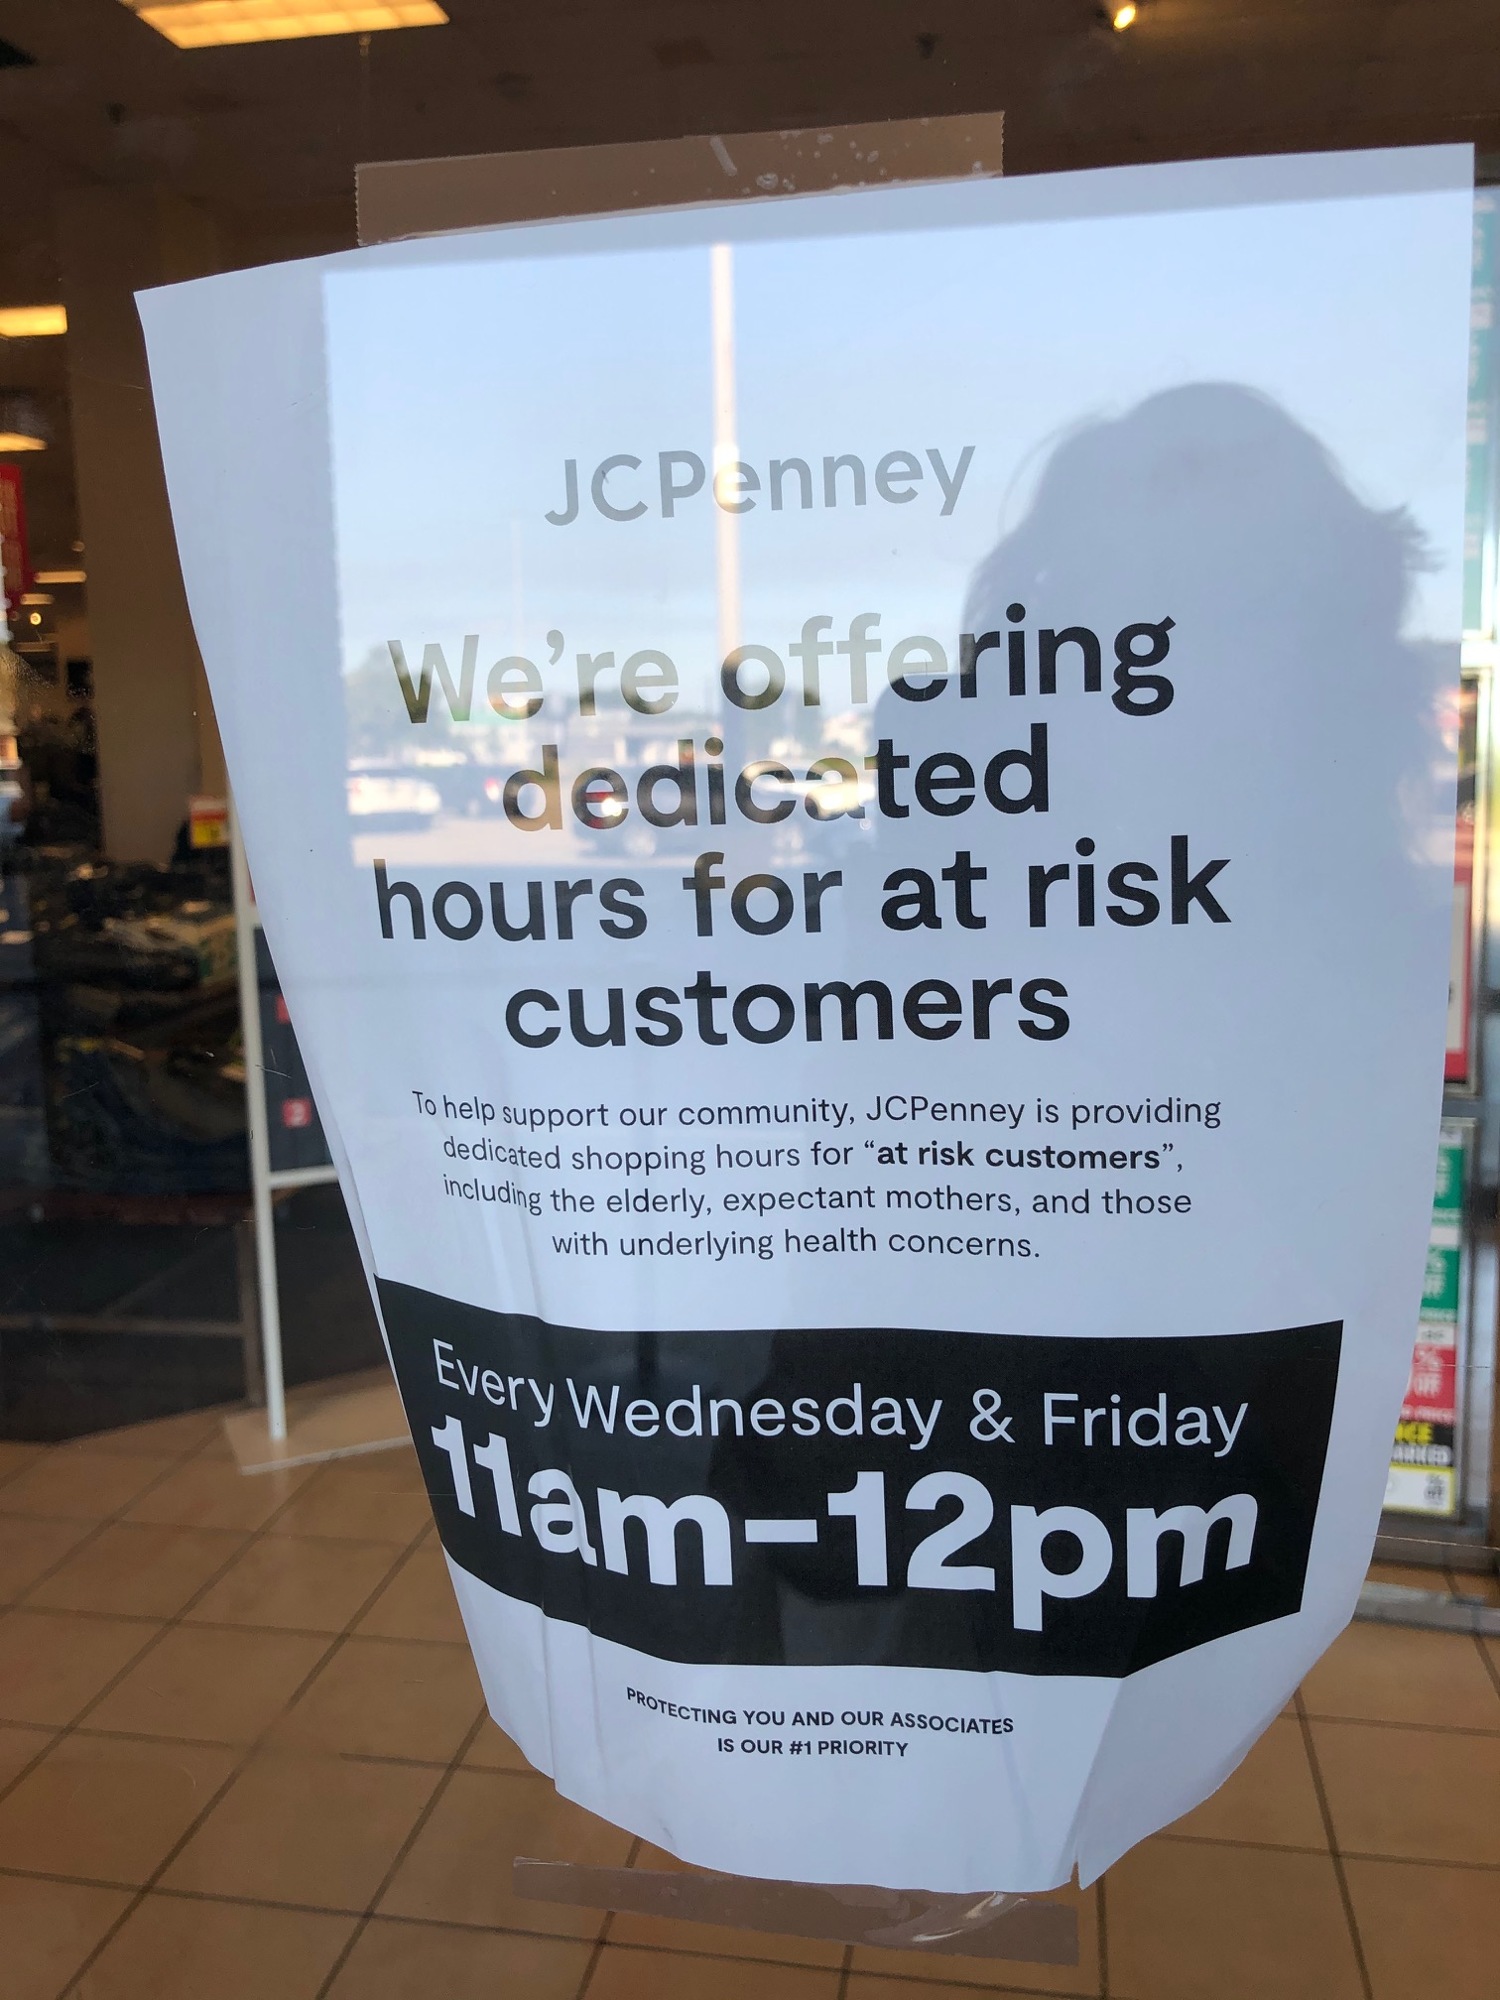 Special hours for at-risk customers.